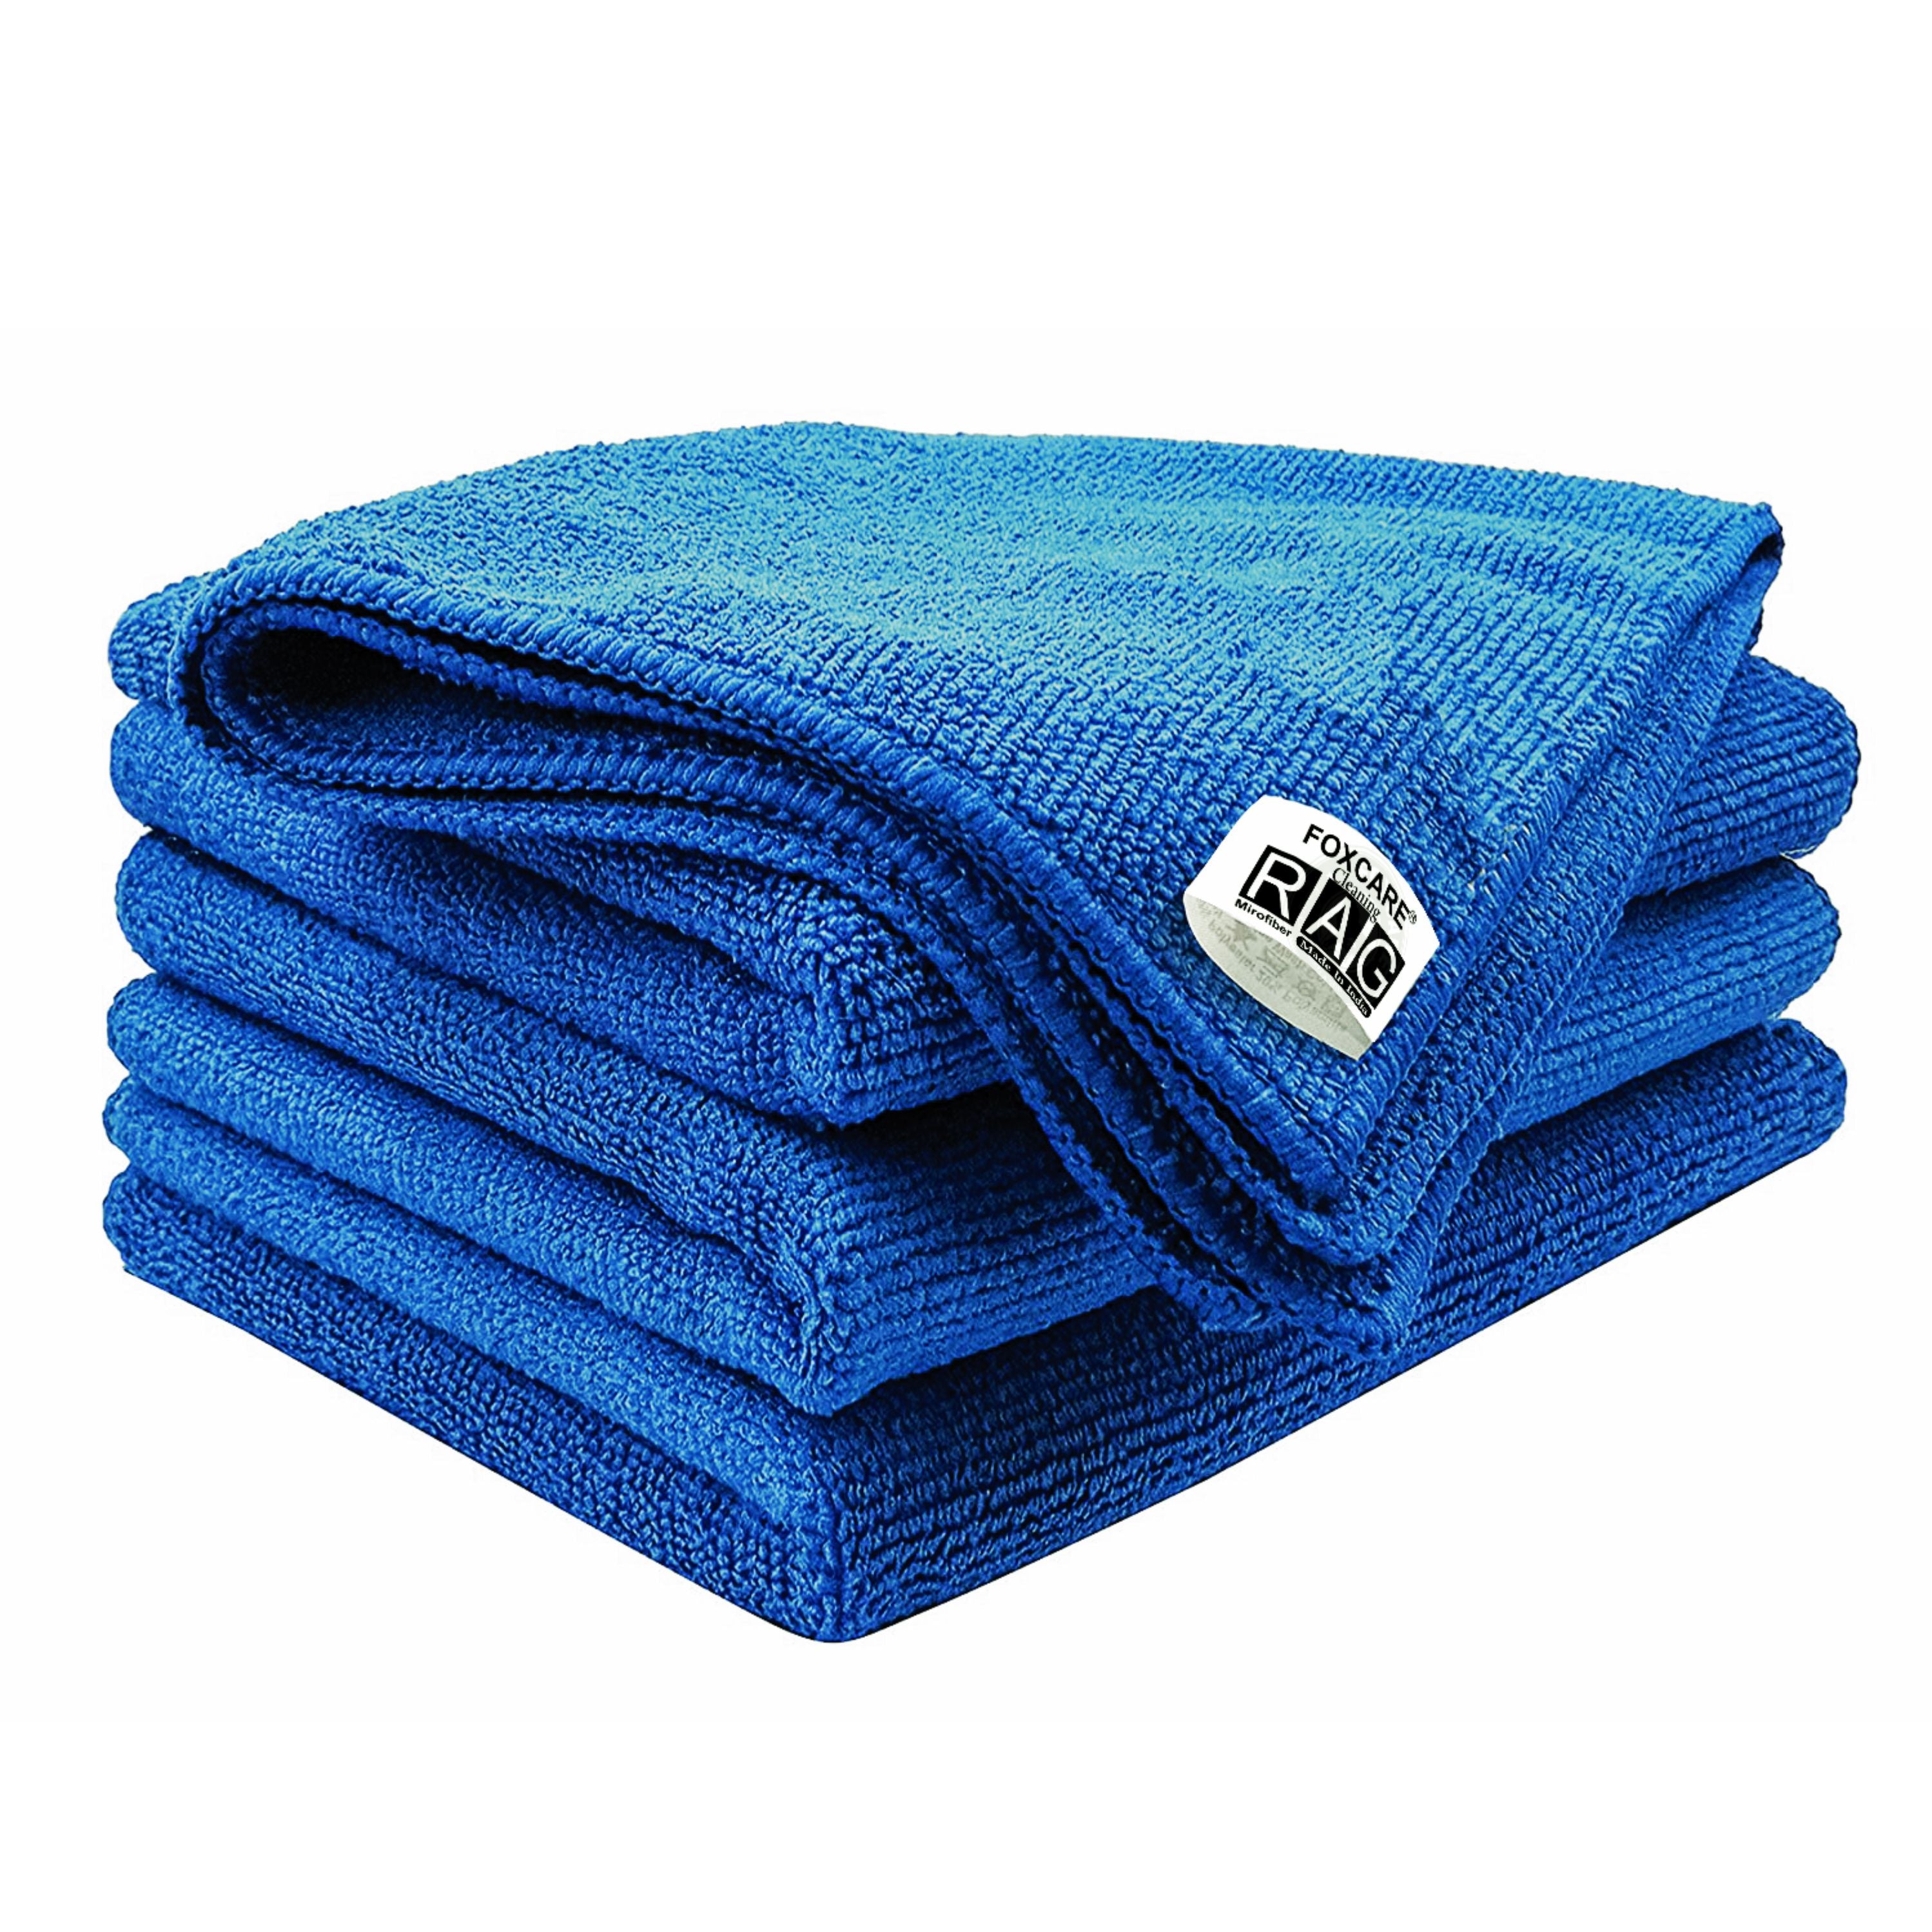 Foxcare Rag Blue Microfiber Cloth - 40x40 cms - 350 GSM - Thick Lint & Streak-Free Multipurpose Cloths -Automotive Microfibre Towels for Car Bike Cleaning Polishing Washing & Detailing